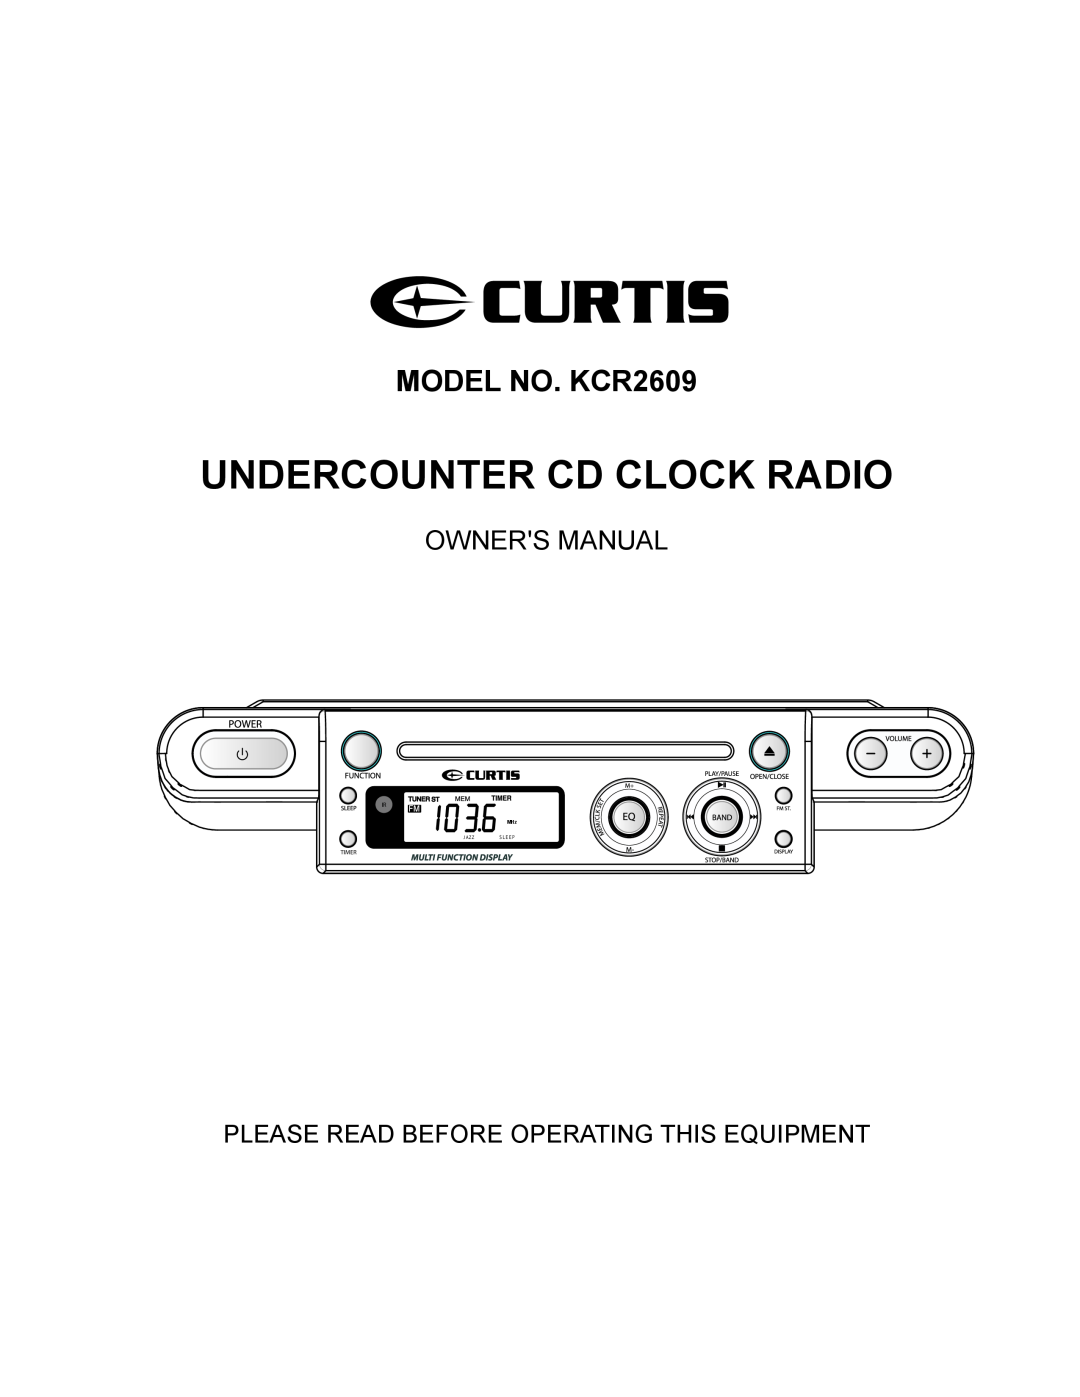 Curtis owner manual Undercounter Cd Clock Radio, MODEL NO. KCR2609, Owners Manual, Timer, J Azz, S L E E P 